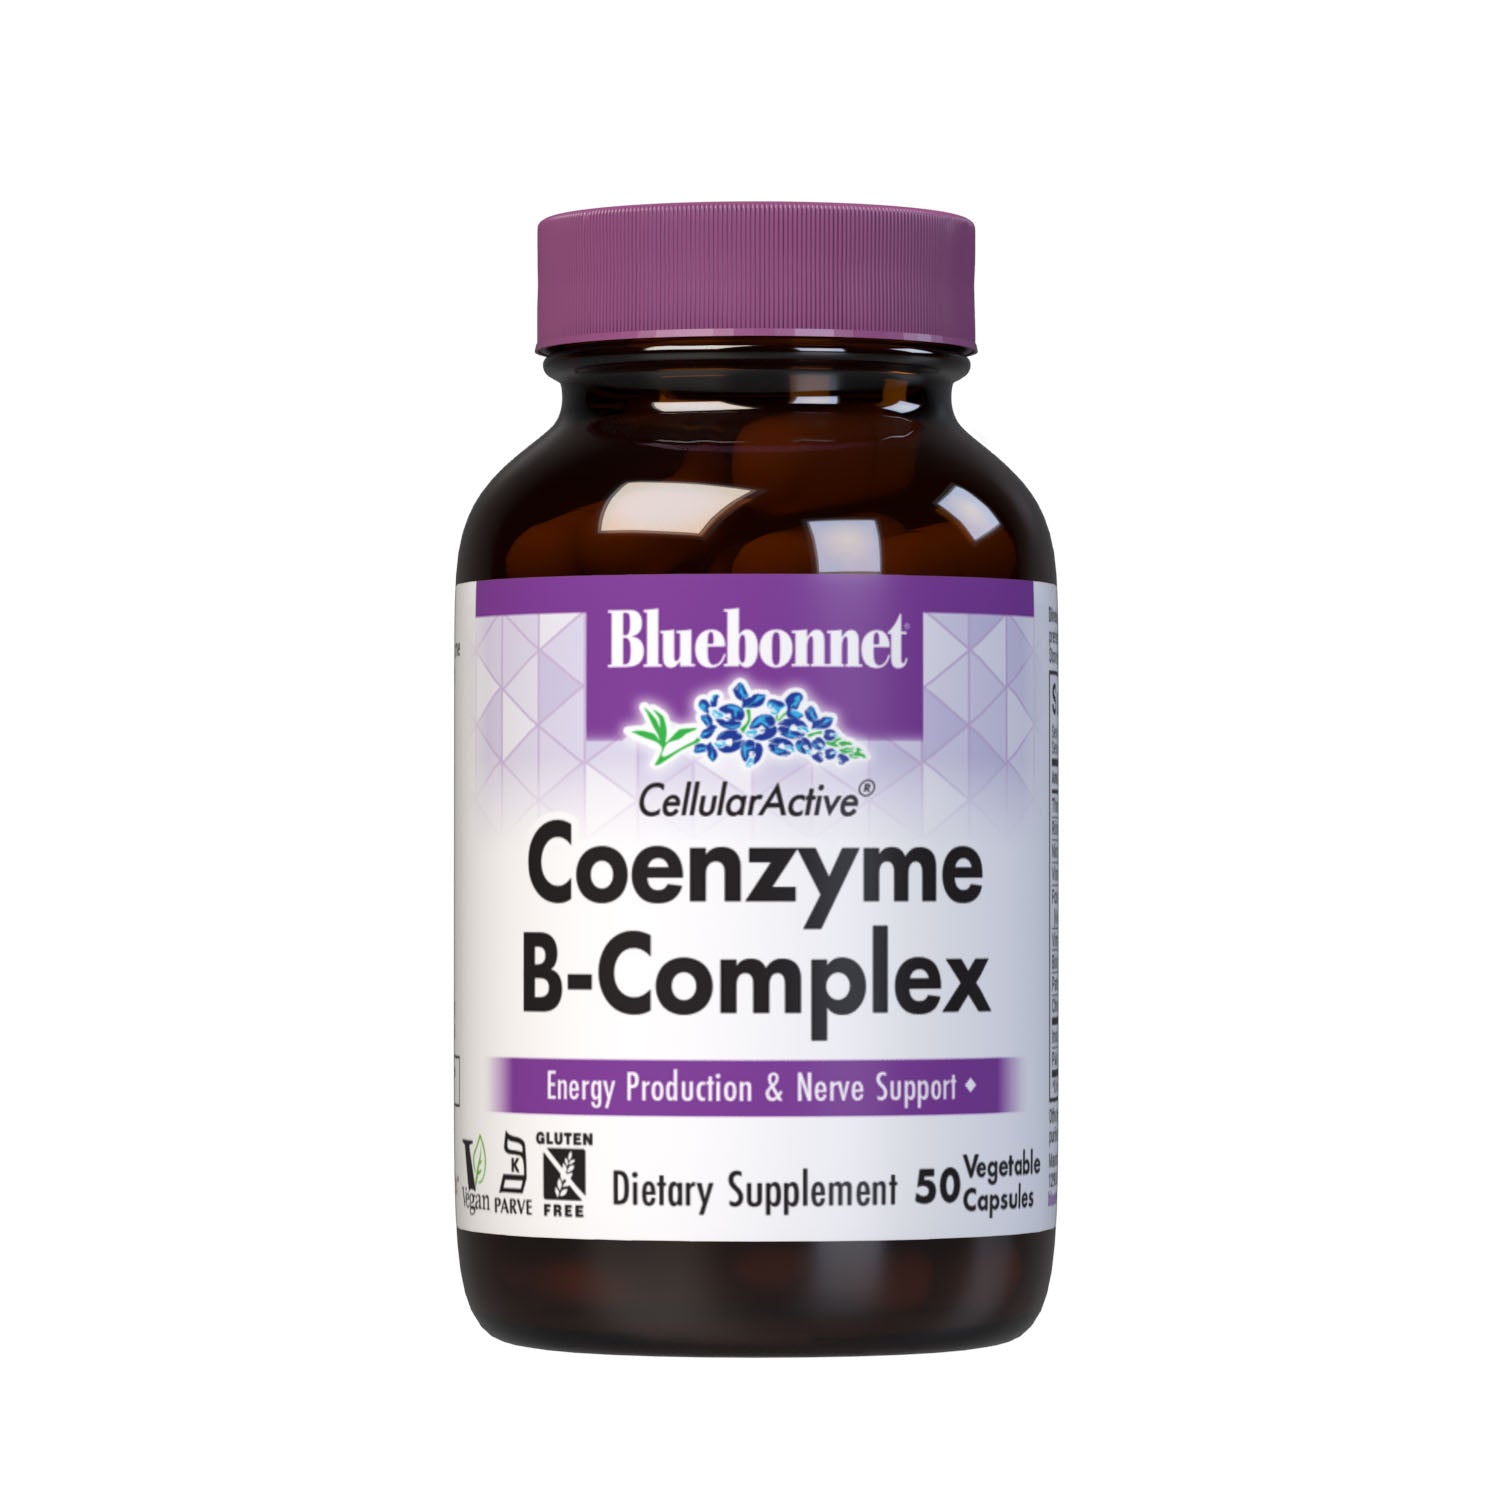 Bluebonnet’s CellularActive Coenzyme B-Complex Vegetable Capsules are formulated with B vitamins and their respective coenzyme forms, which are better absorbed, retained and utilized in the body. B vitamins are essential for energy and red blood cell production, proper nervous system function, healthy hair, skin and nails, and countless other metabolic processes. #size_50 count